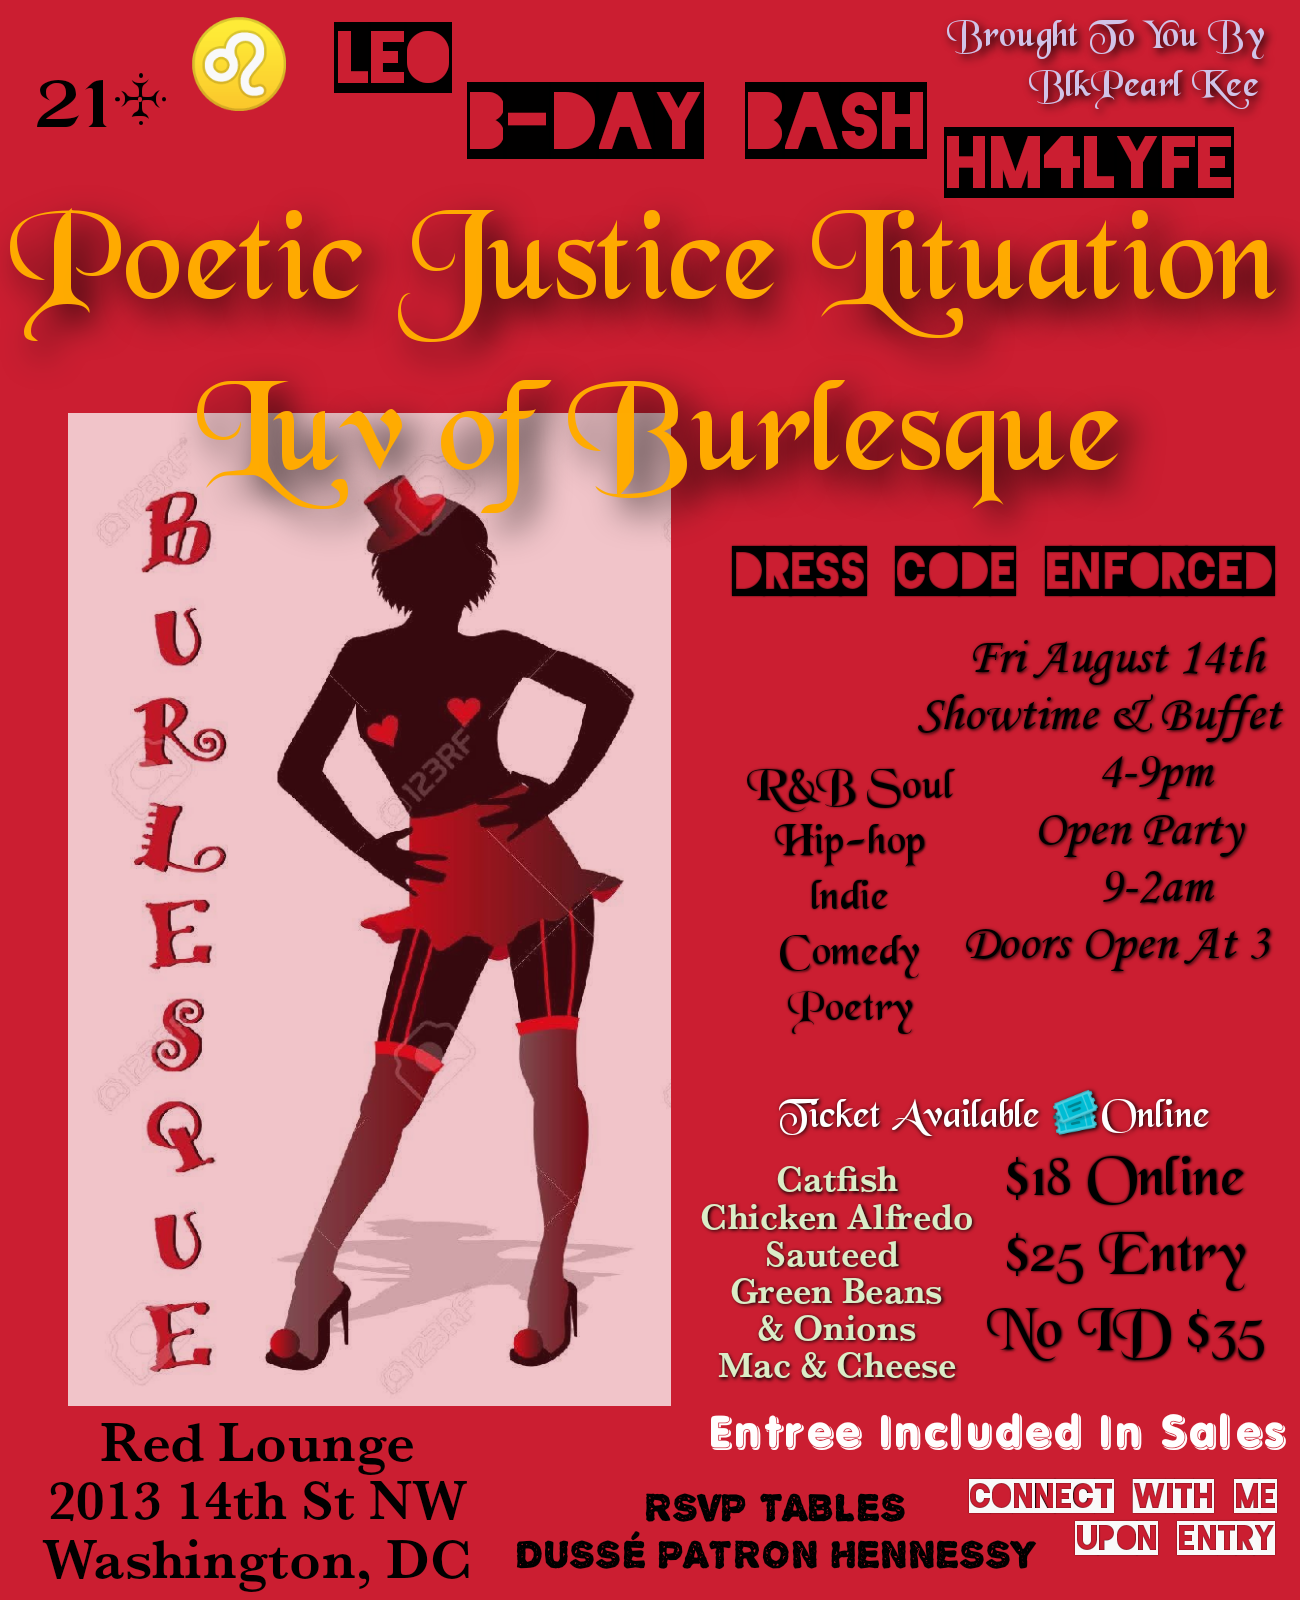 POETIC JUSTICE LITUATION EVENTS Luv of Burlesque